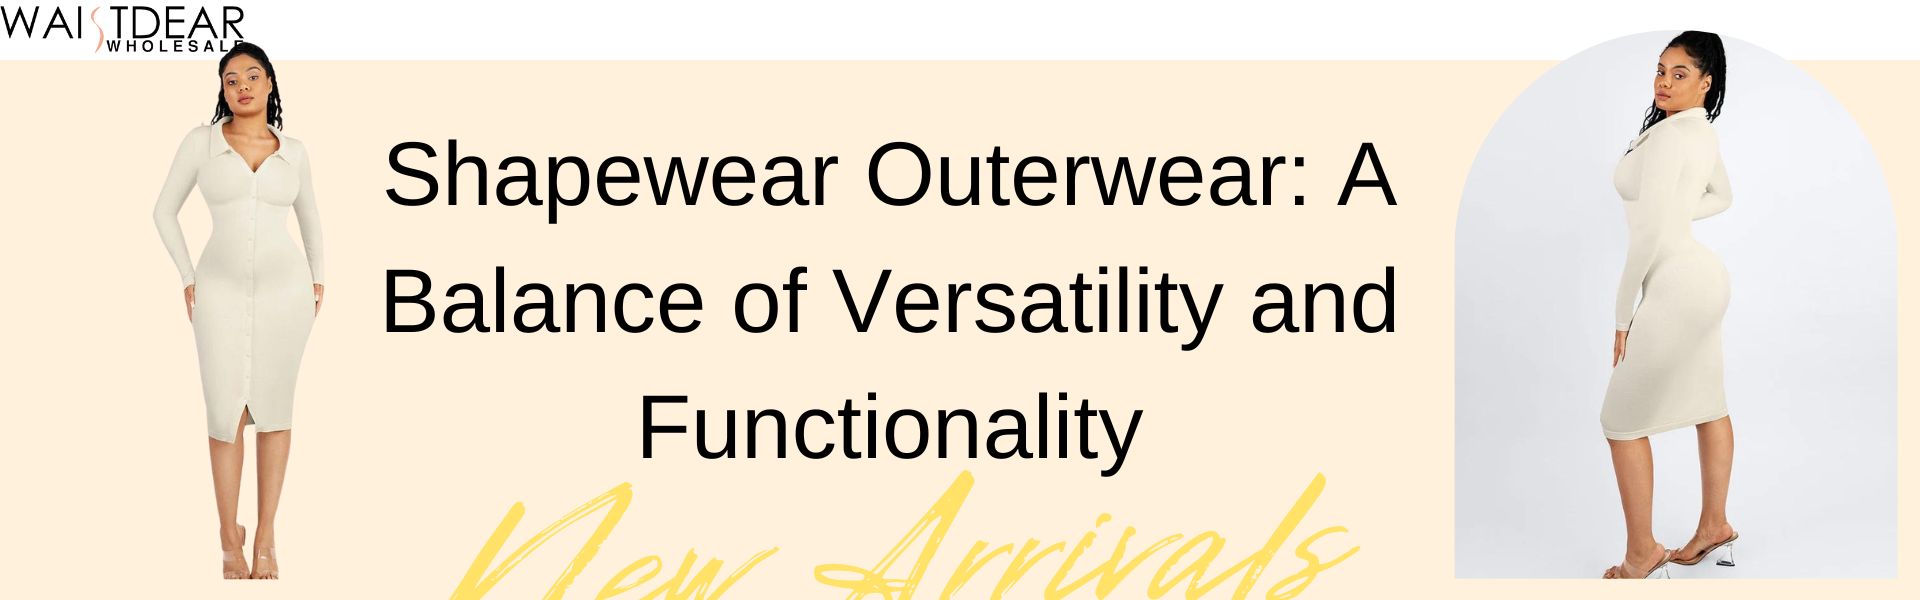 Shapewear Outerwear: A Balance of Versatility and Functionality